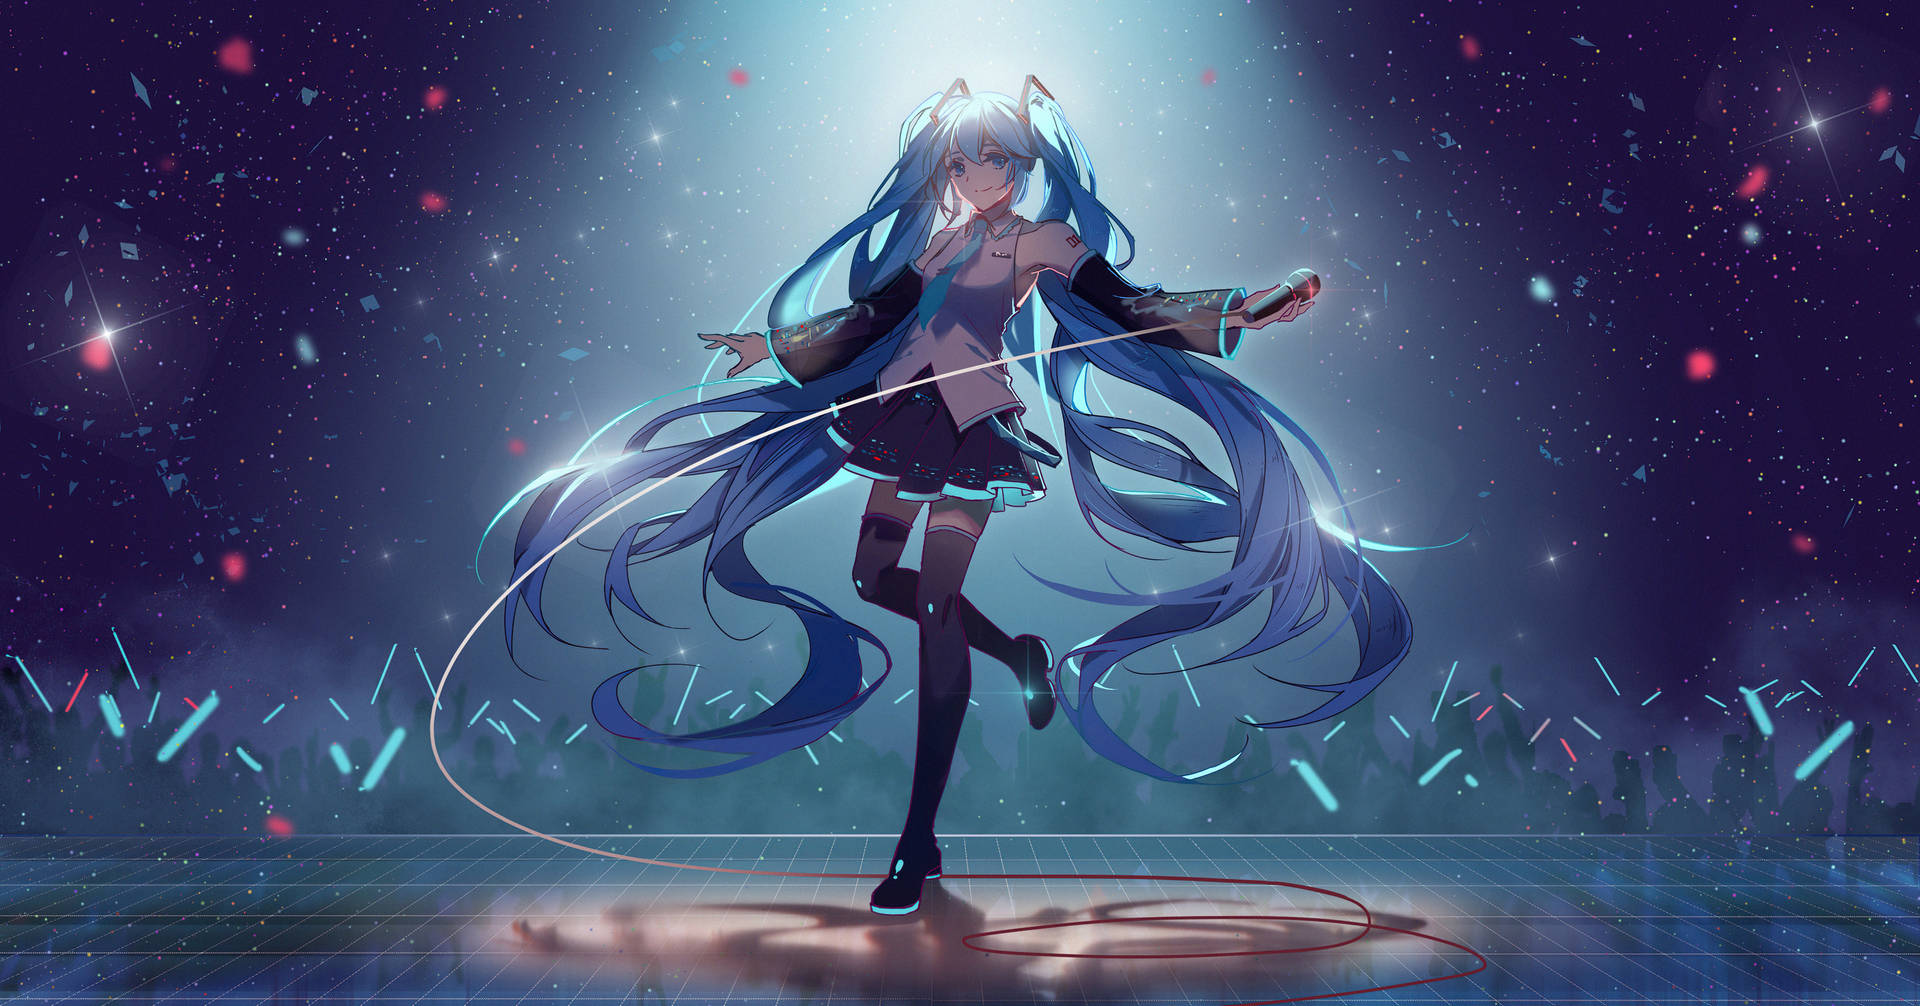 The Magical World Of Vocaloid